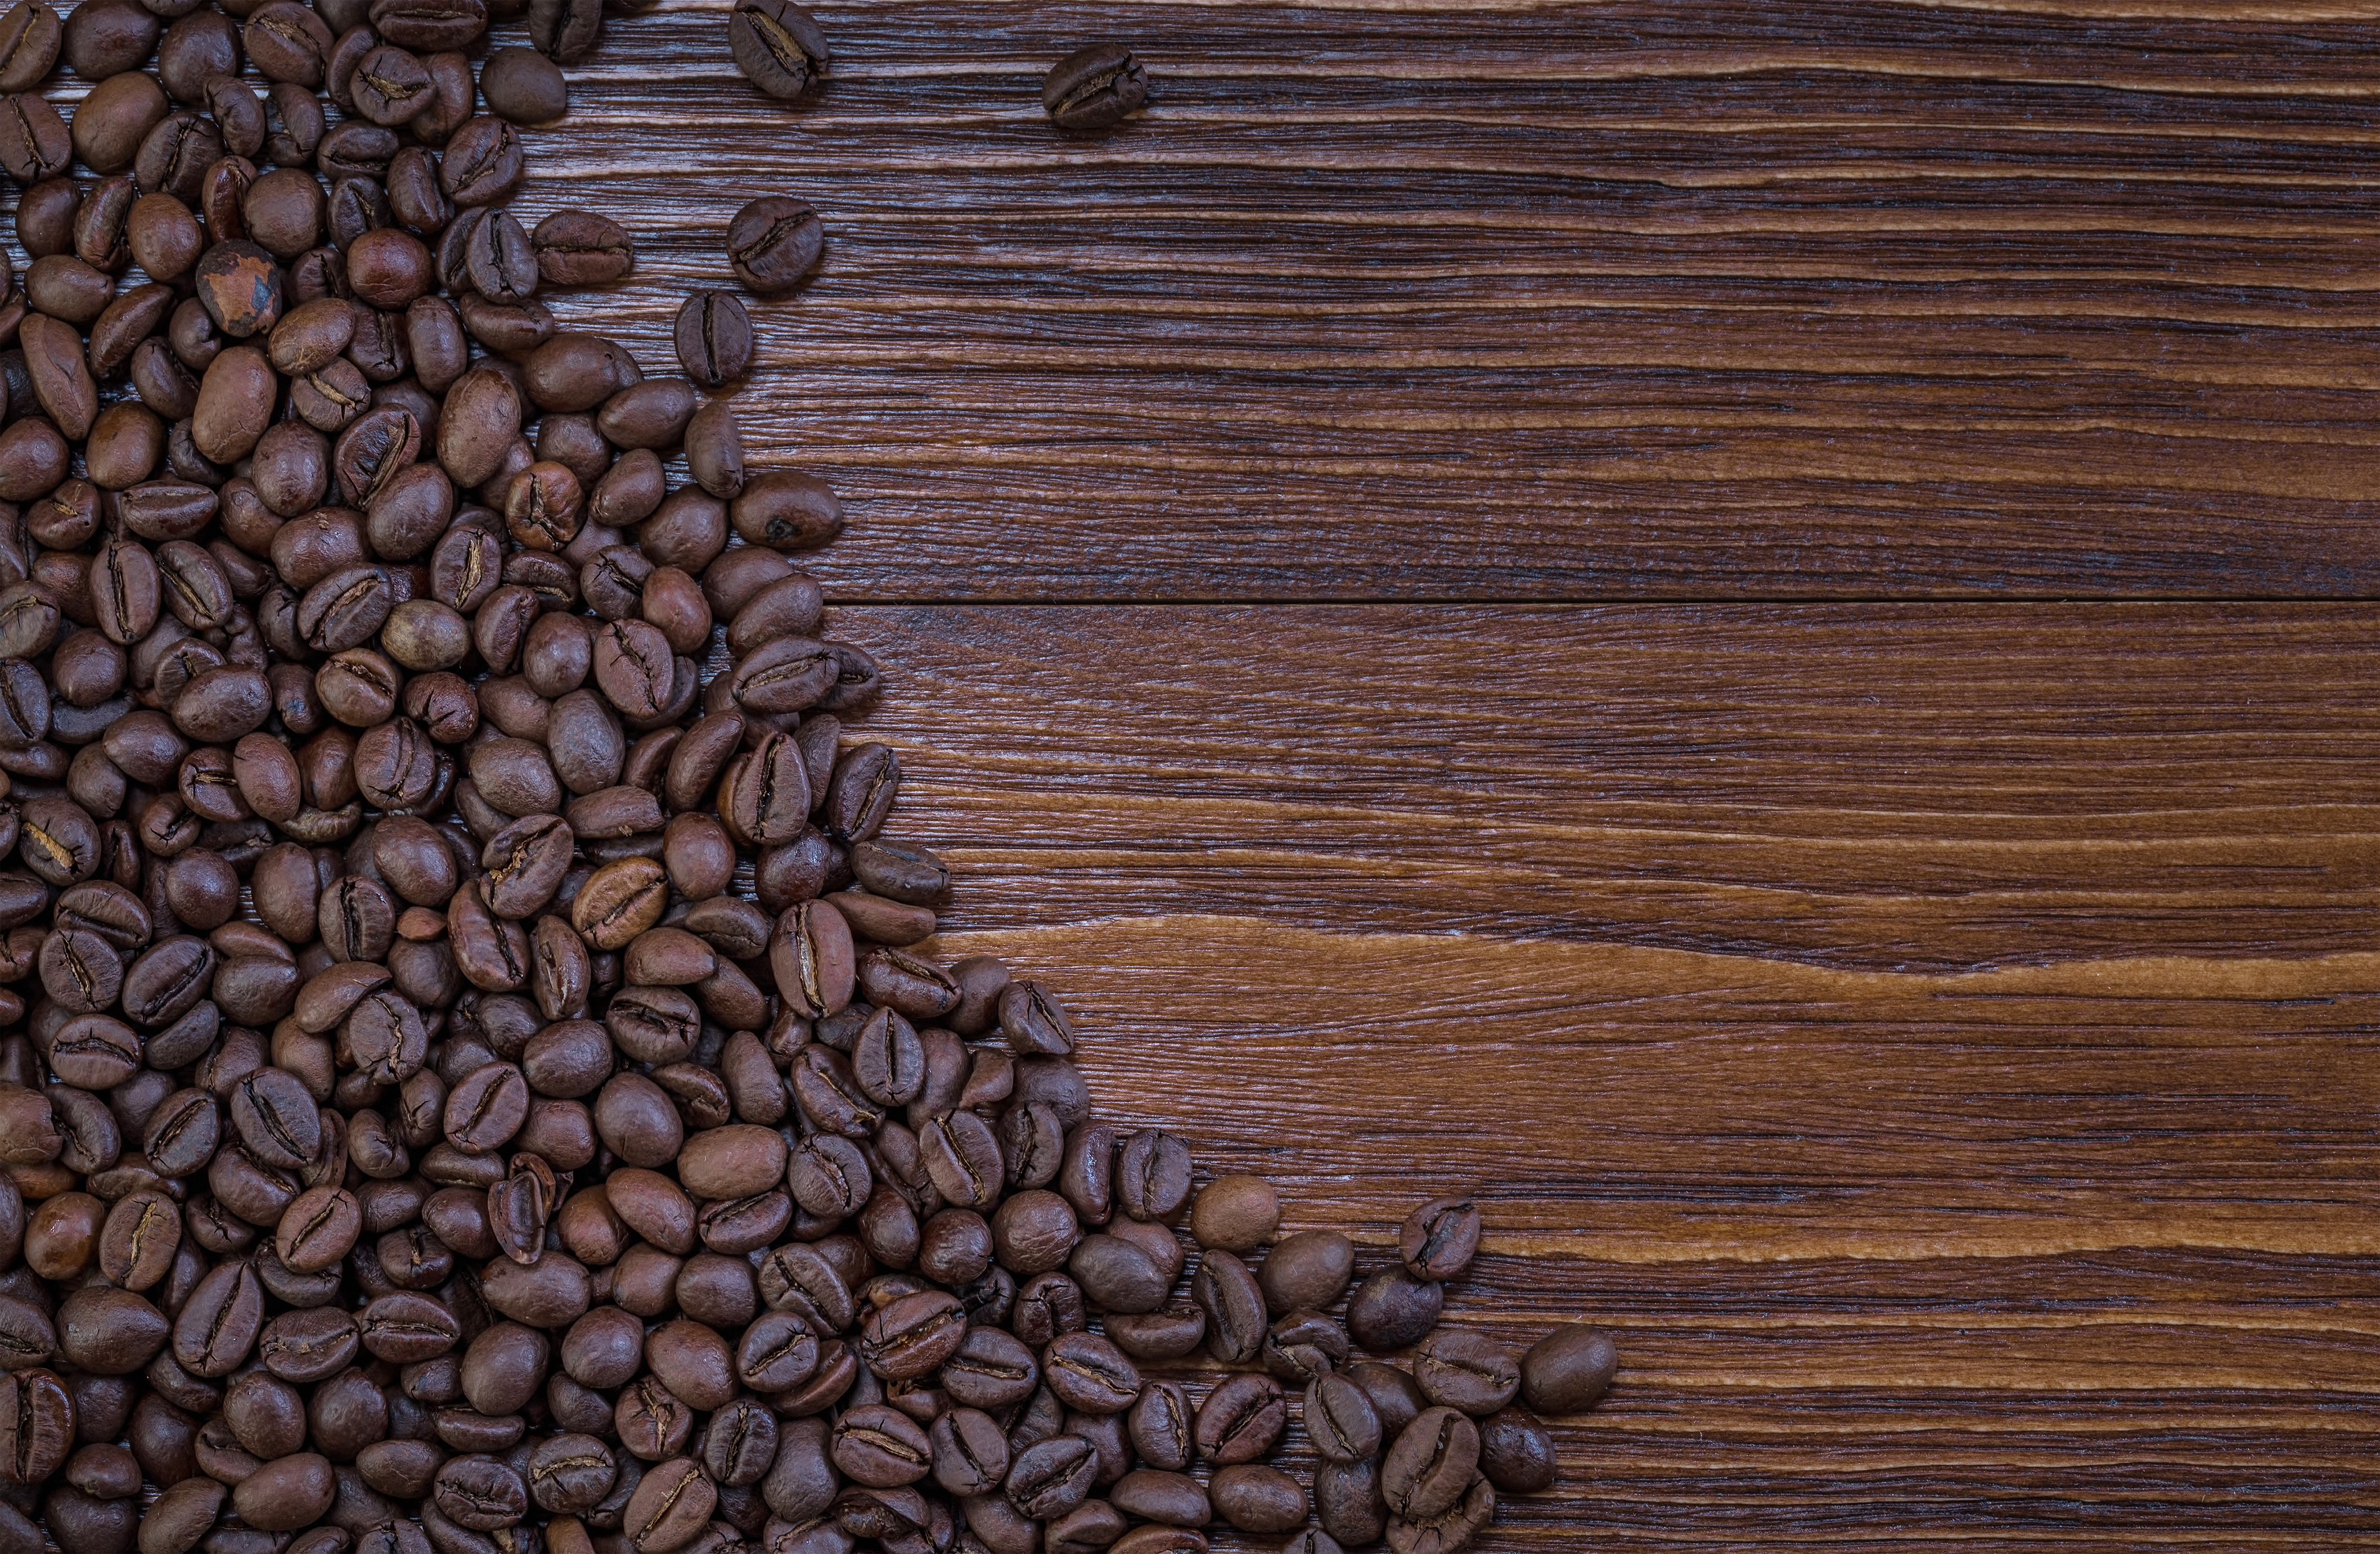 Coffee Beans Wooden Background Gallery Yopriceville High